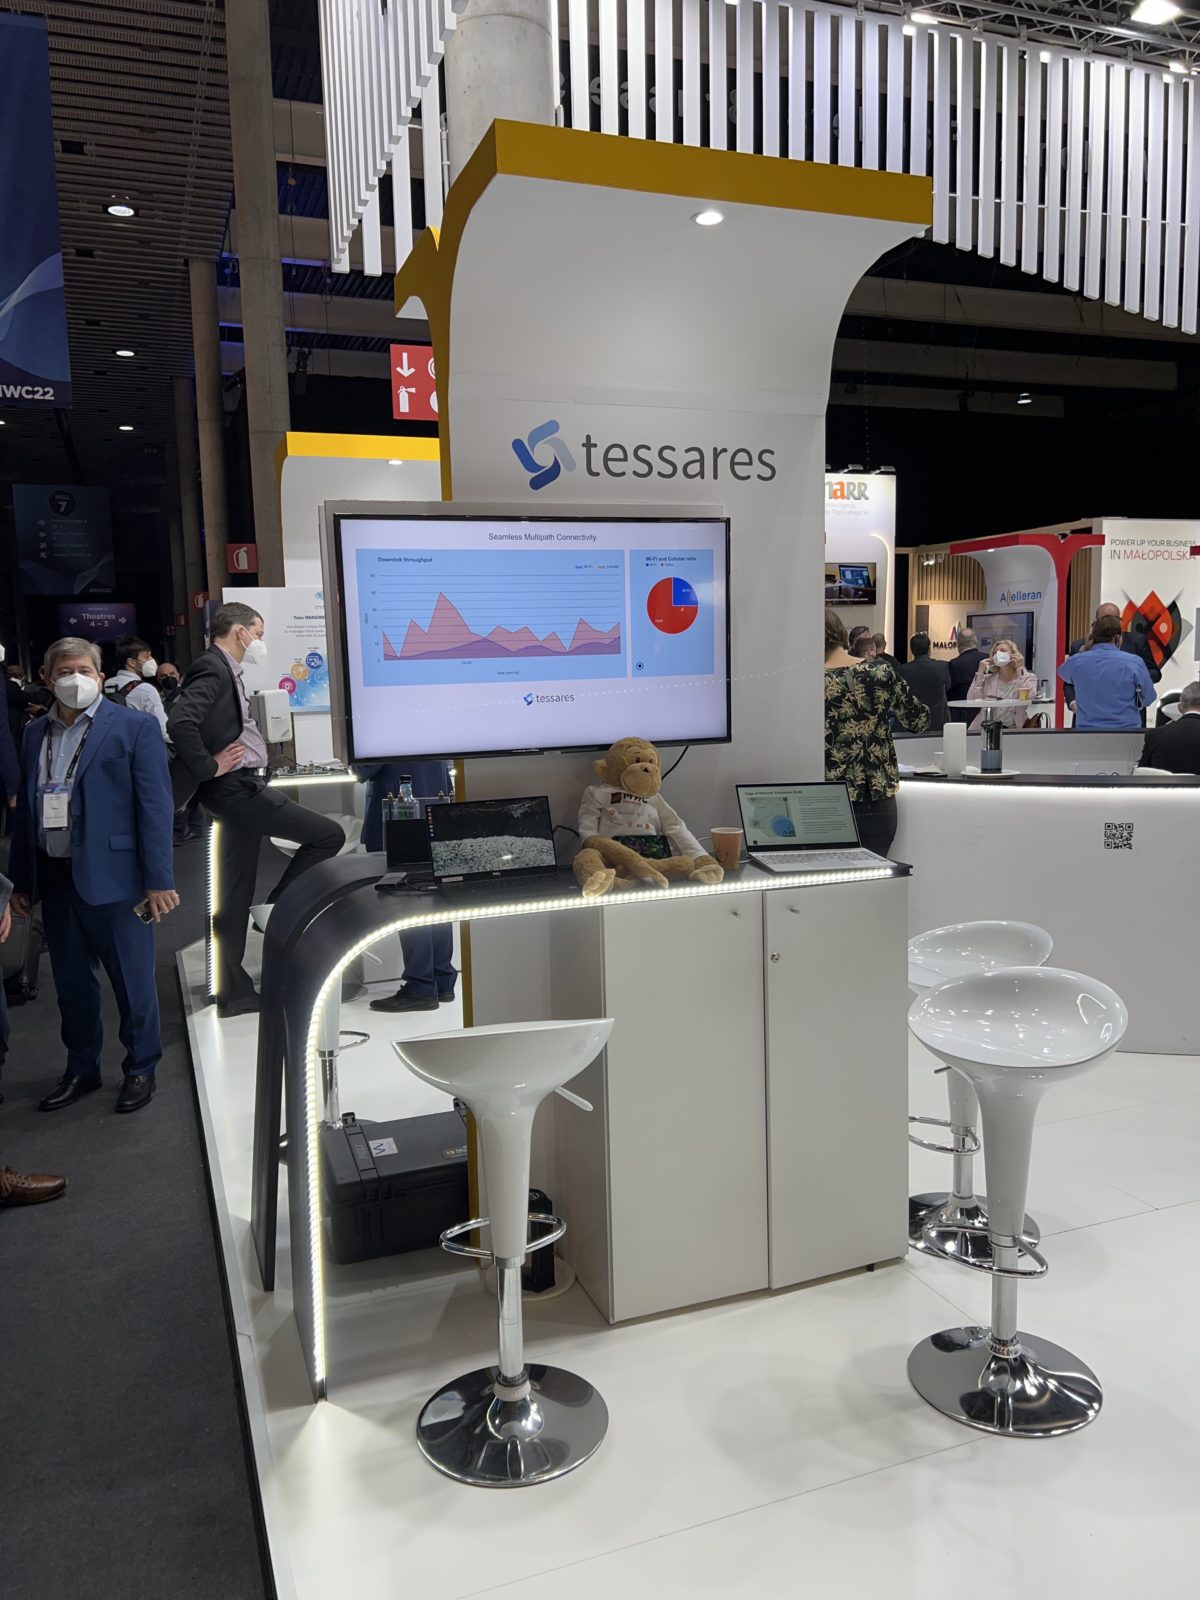 Tessares' stand at the MWC 2022 conference